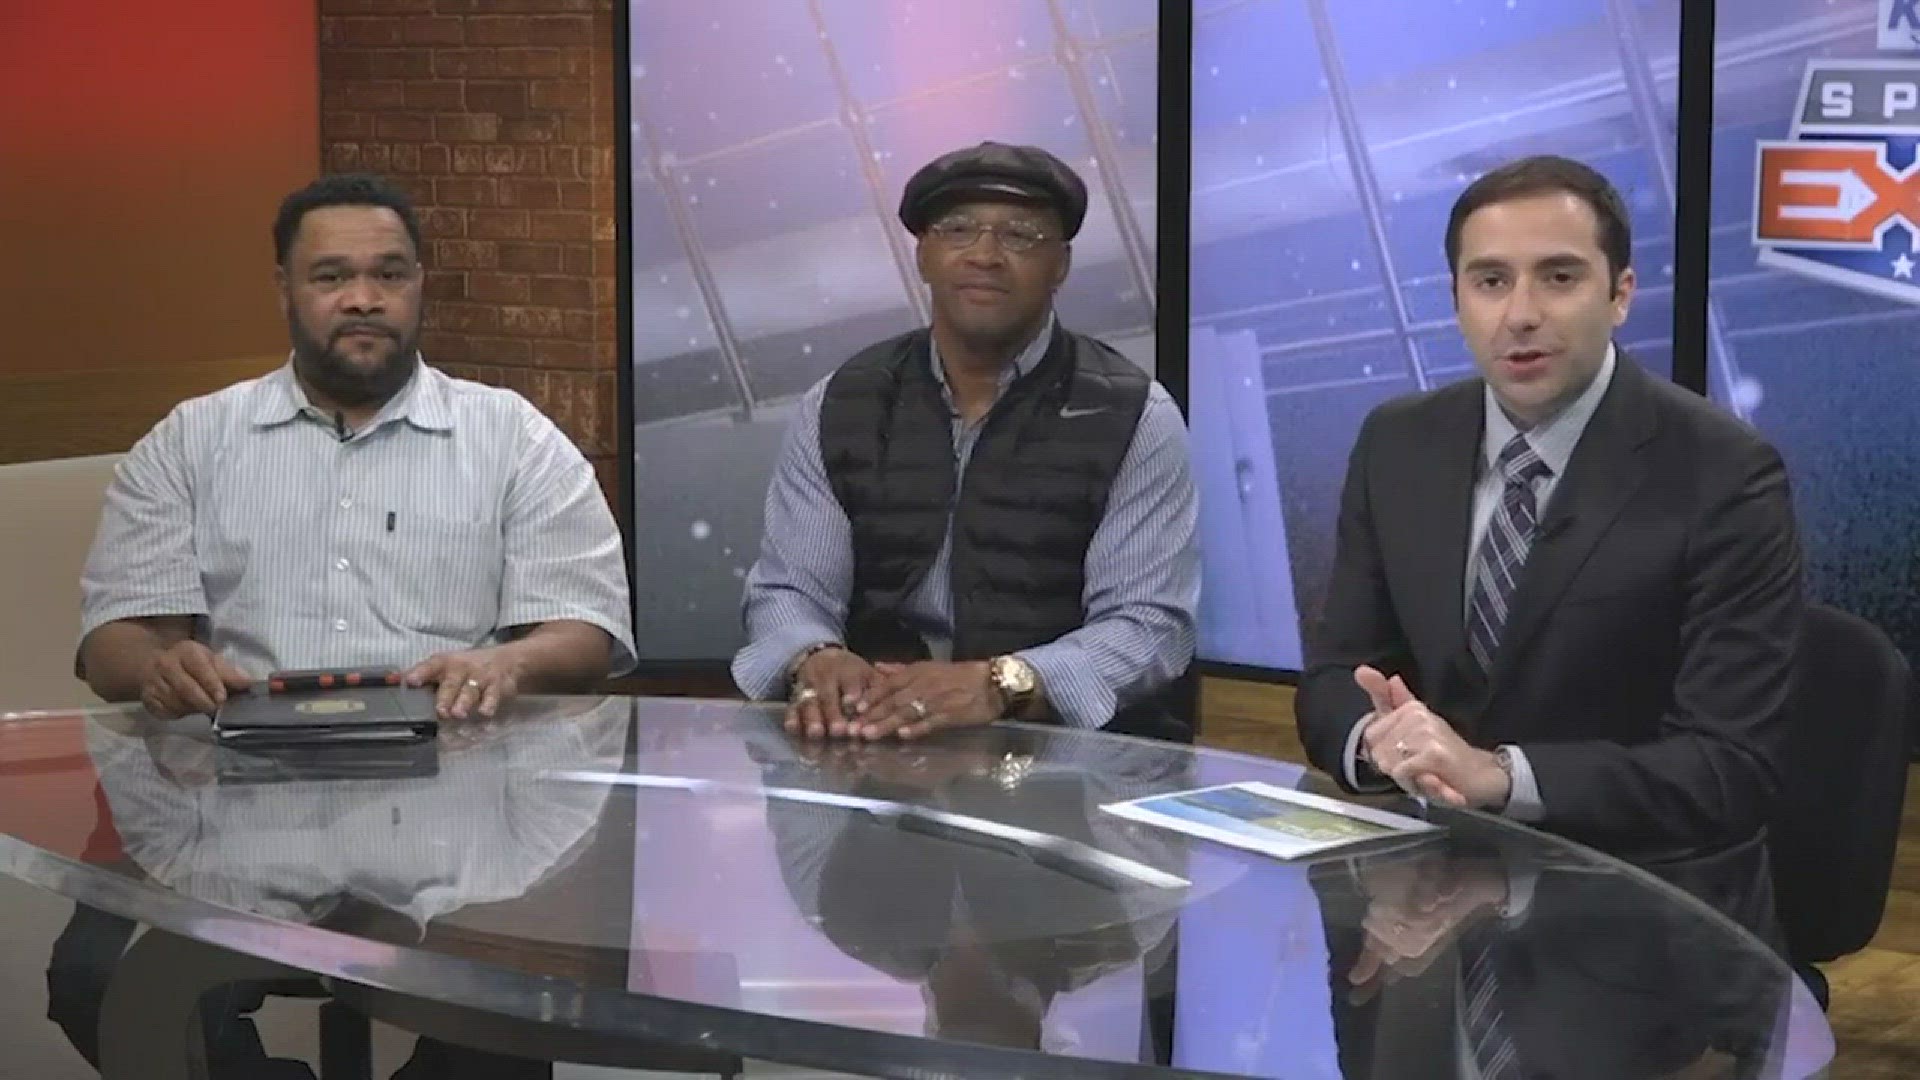 Former Houston Oilers running back and 1983 Heisman Trophy winner Mike Rozier stopped by the KHOU 11 studios to discuss his upcoming Heisman Player's Weekend and Golf Tournament. He and promoter Floy Johnson talk football with KHOU 11 Sports reporter Daniel Gotera and discuss some of the highlights of the upcoming event. Go to hisgracefoundation.org for more information.